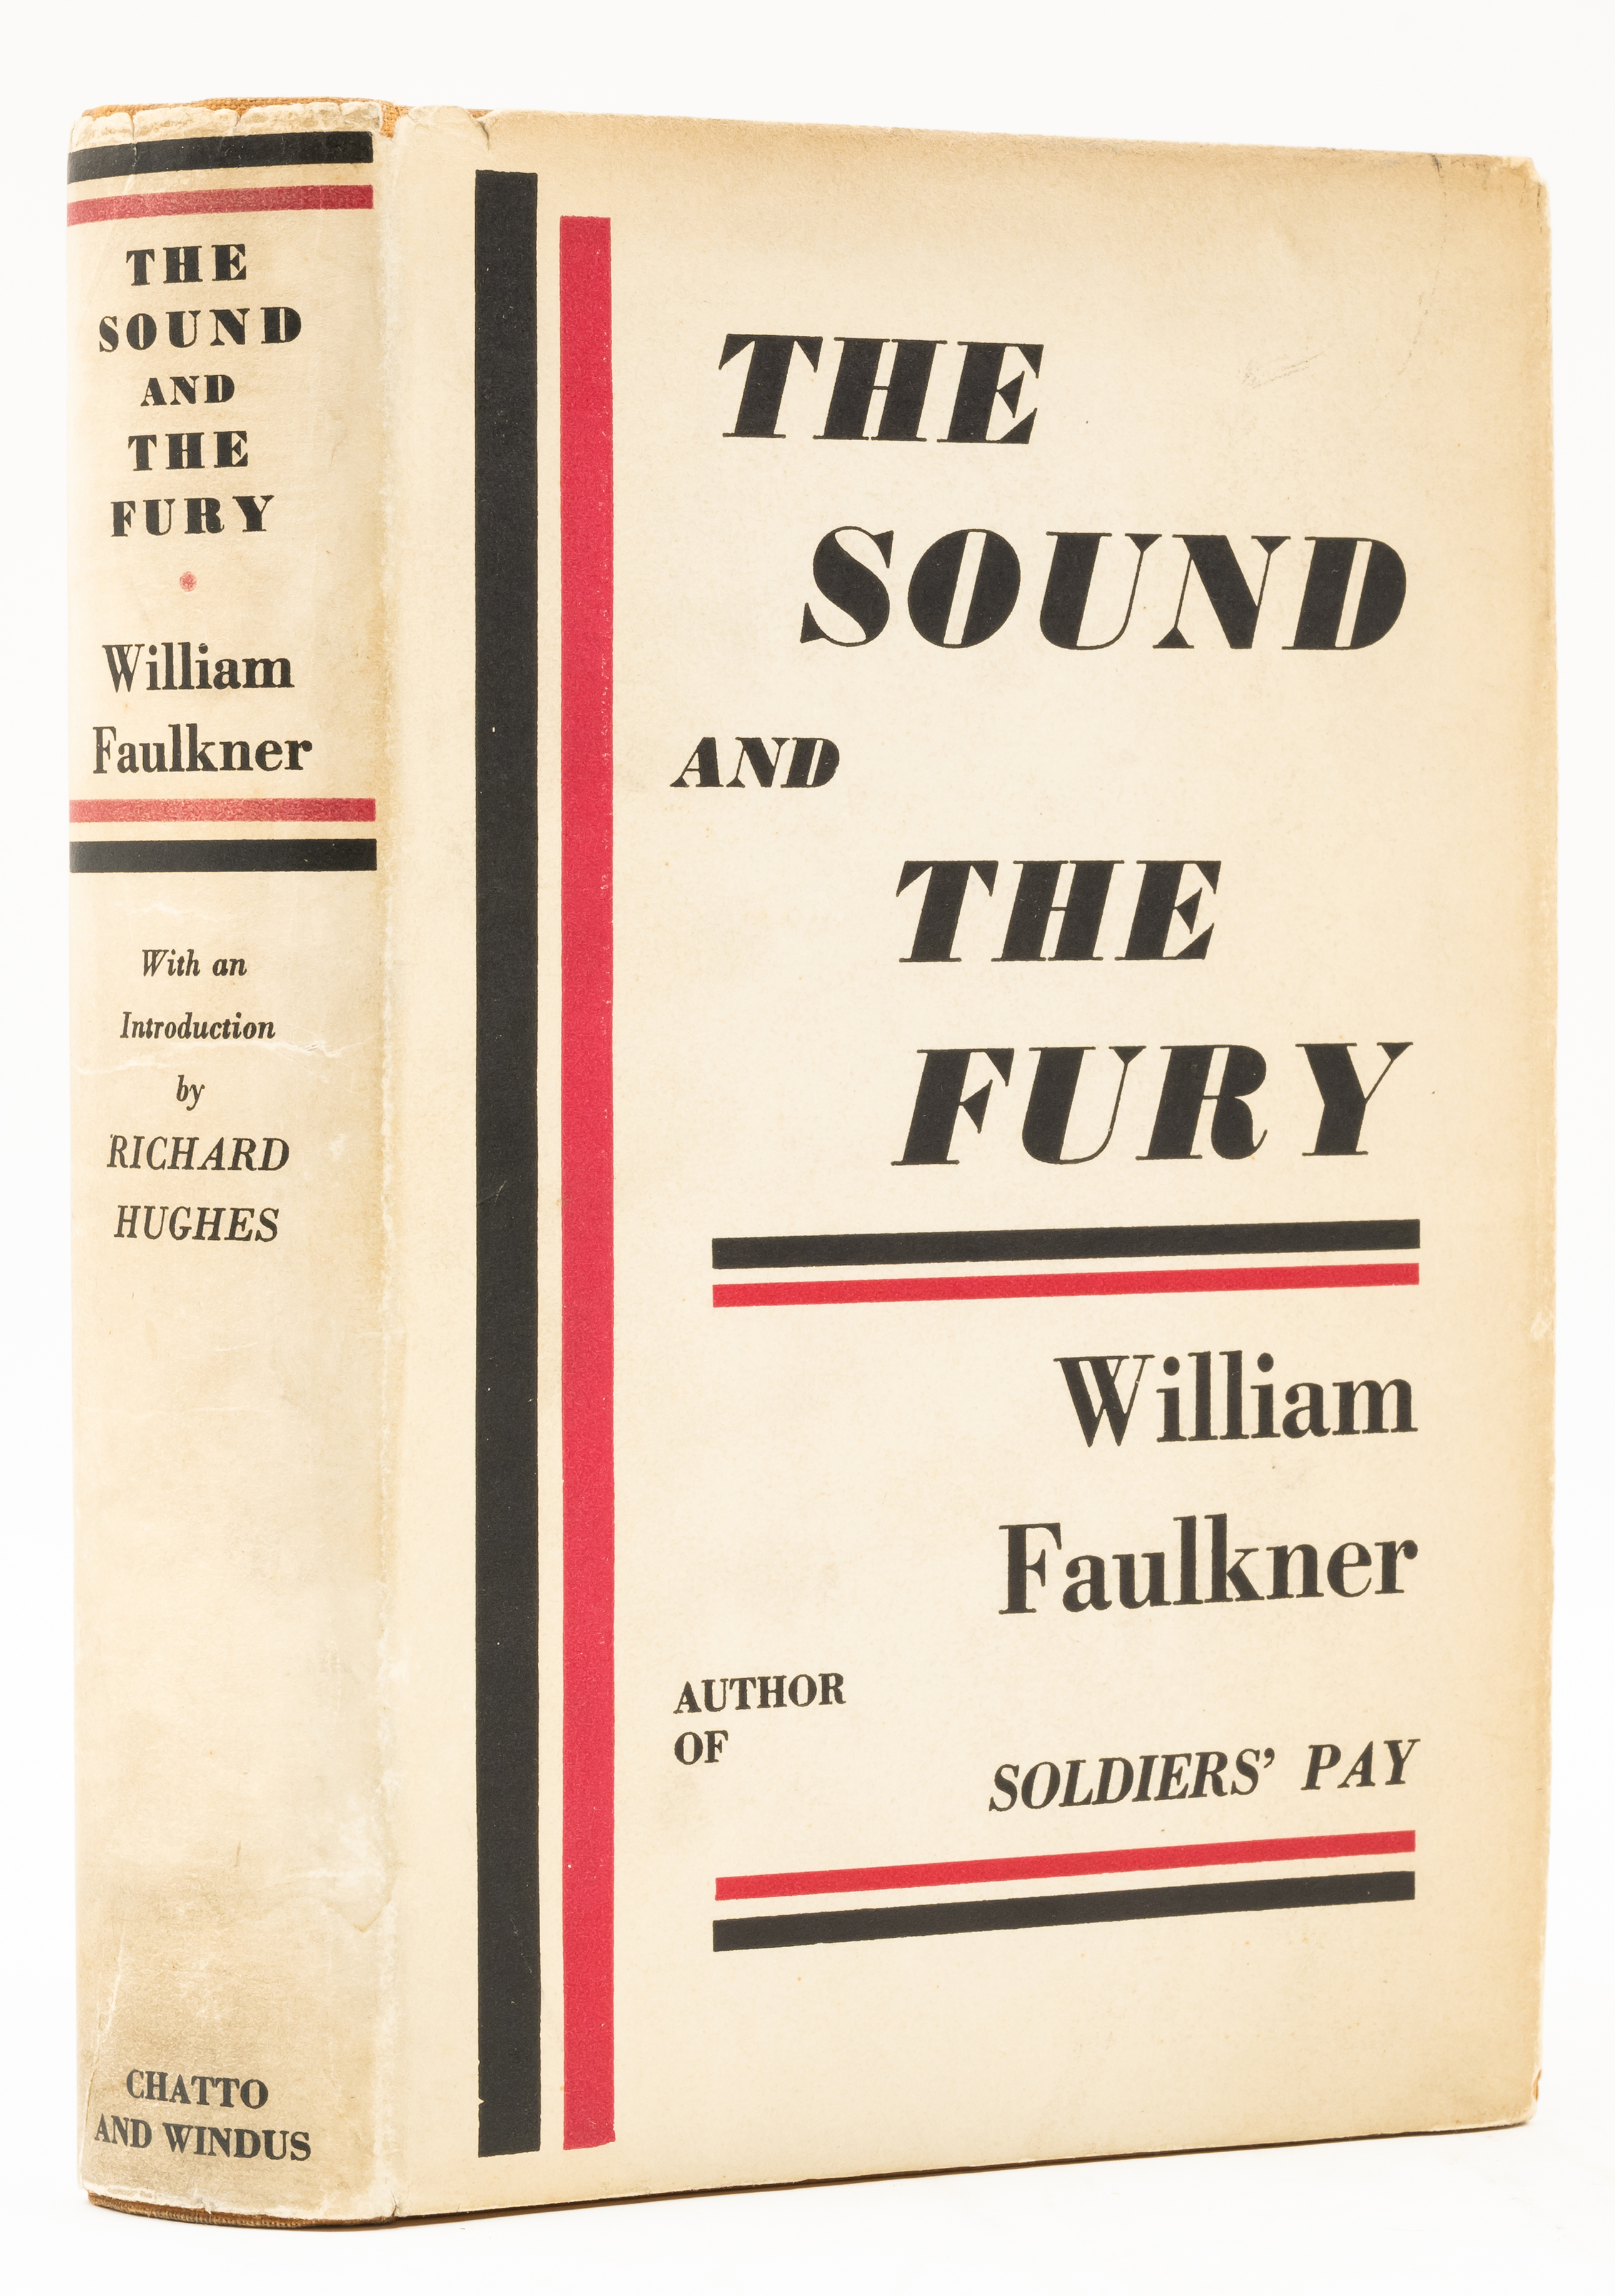 Faulkner (William) The Sound and the Fury, first English edition, 1931.